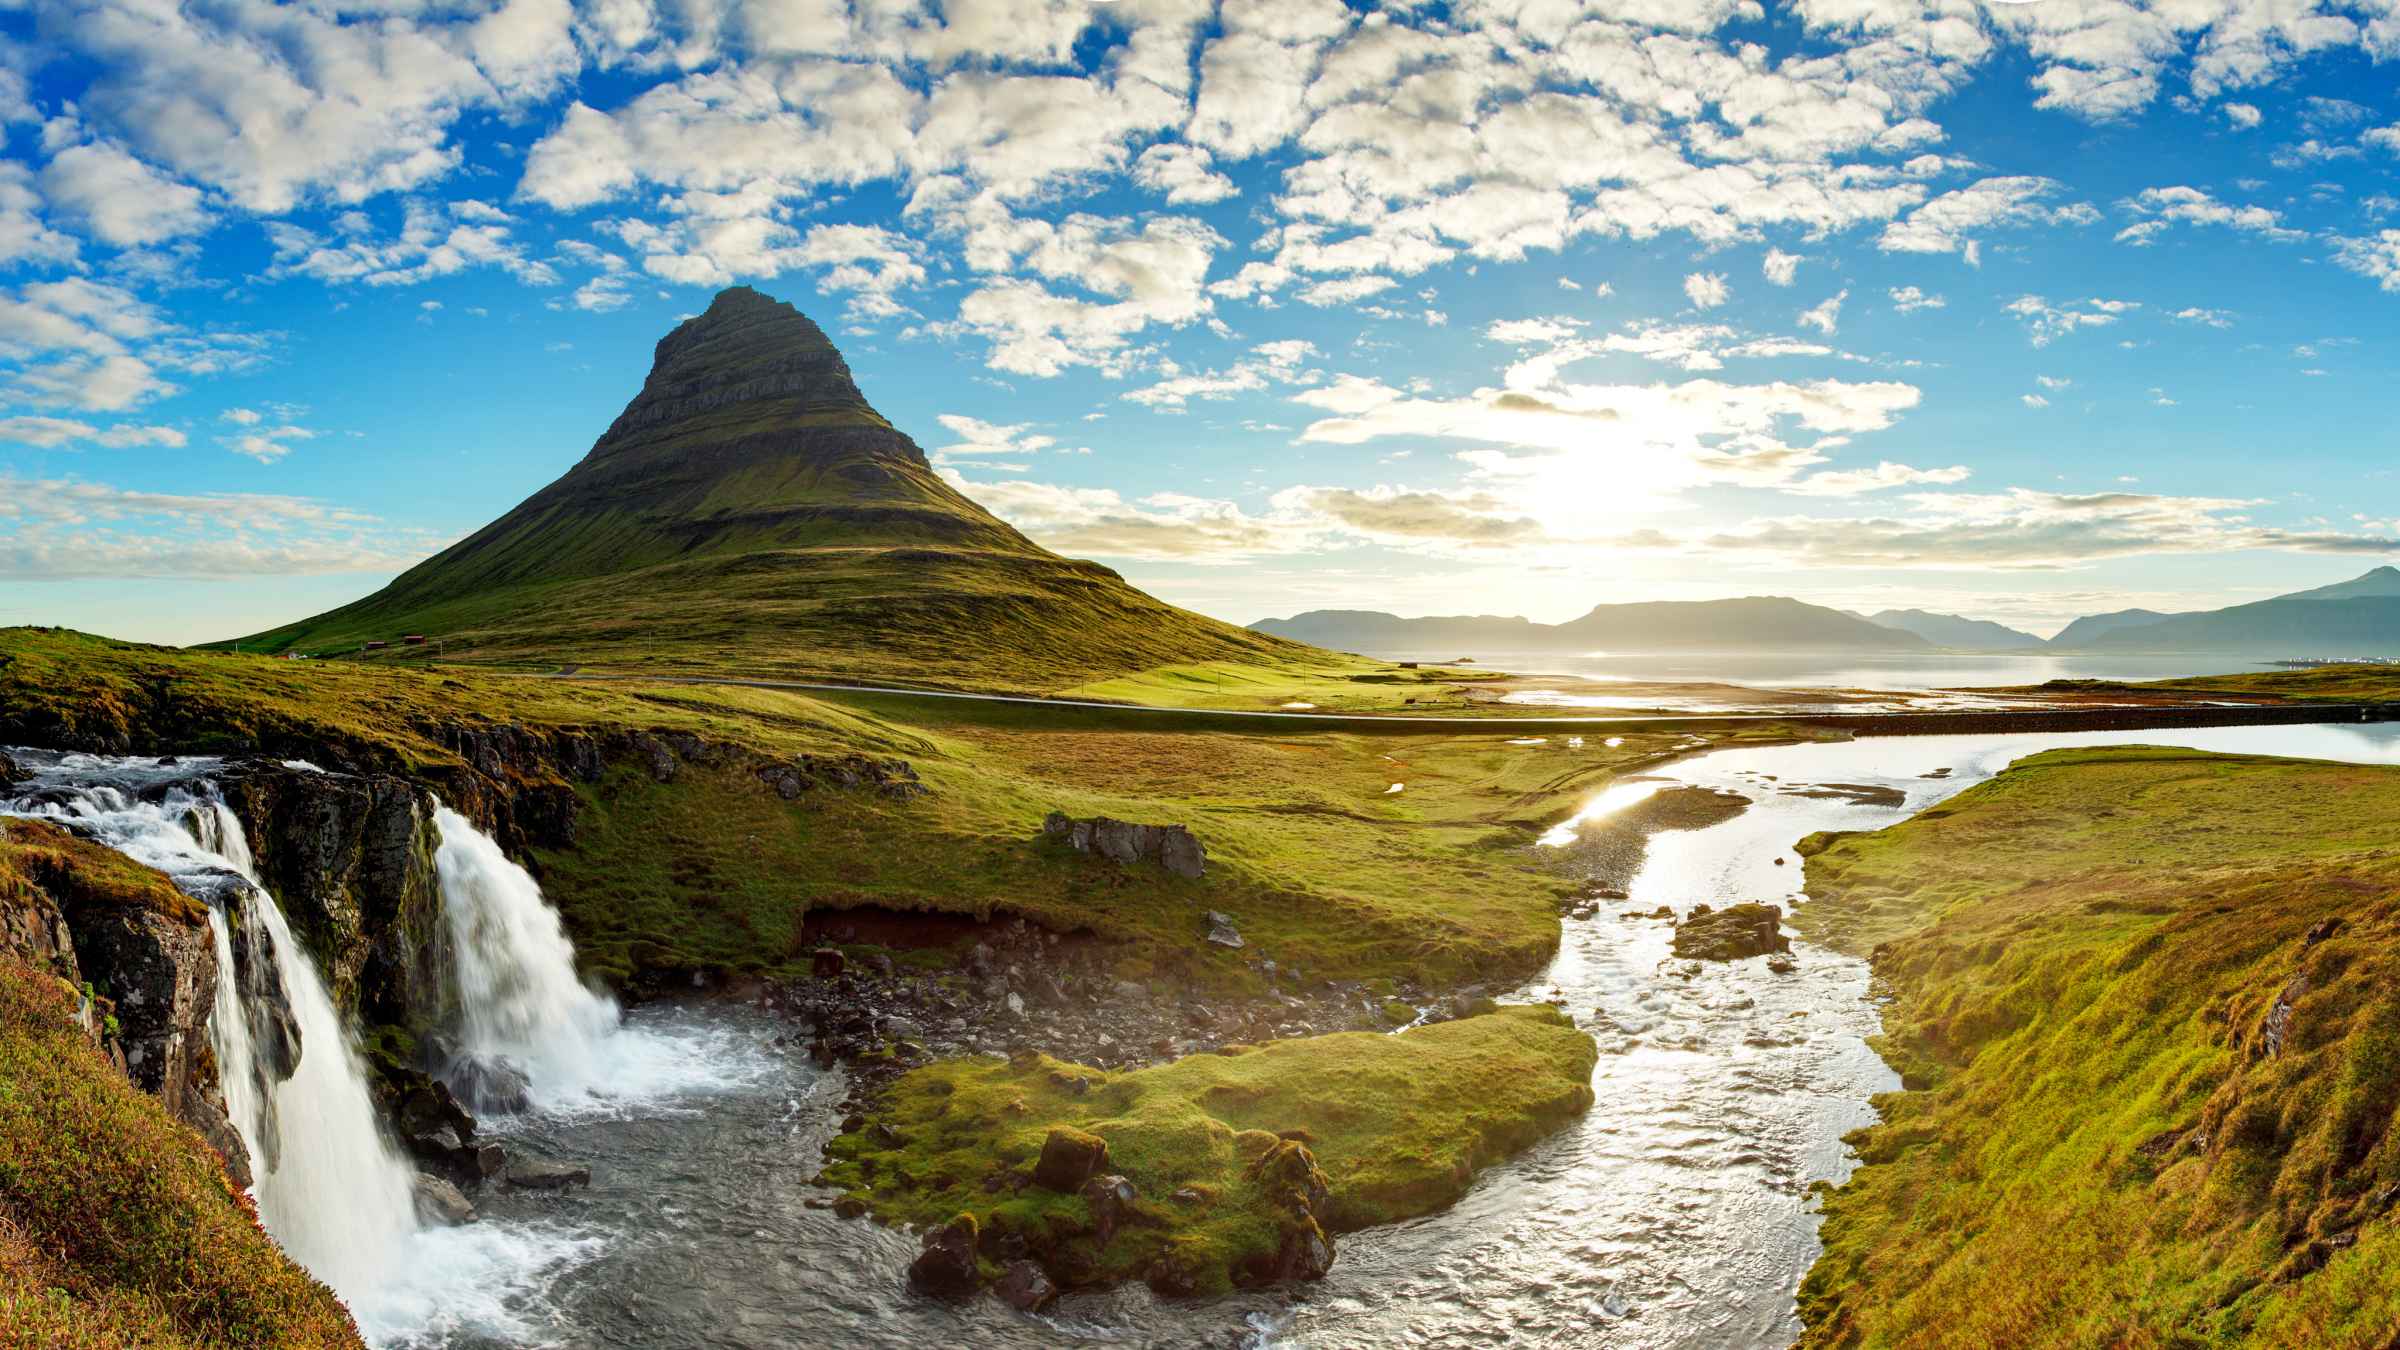 Iceland 2021: Top 10 Tours, Trips &amp; Activities (with Photos) - Things to Do in Iceland | GetYourGuide